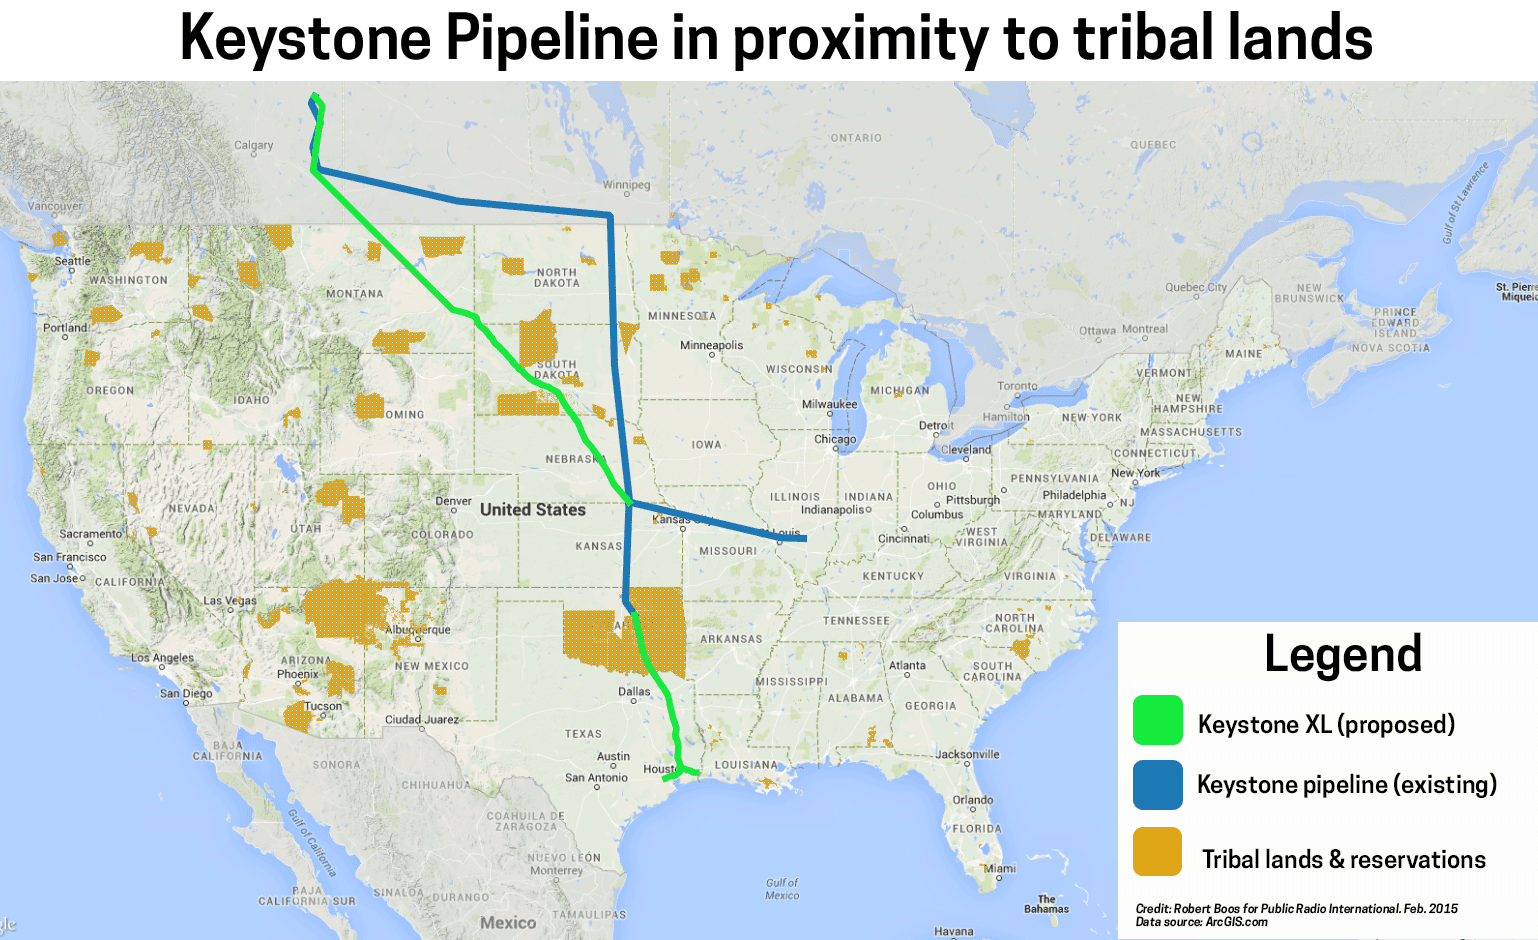 A map showing the proposed route of the Keystone XL pipeline and its path through tribal lands.